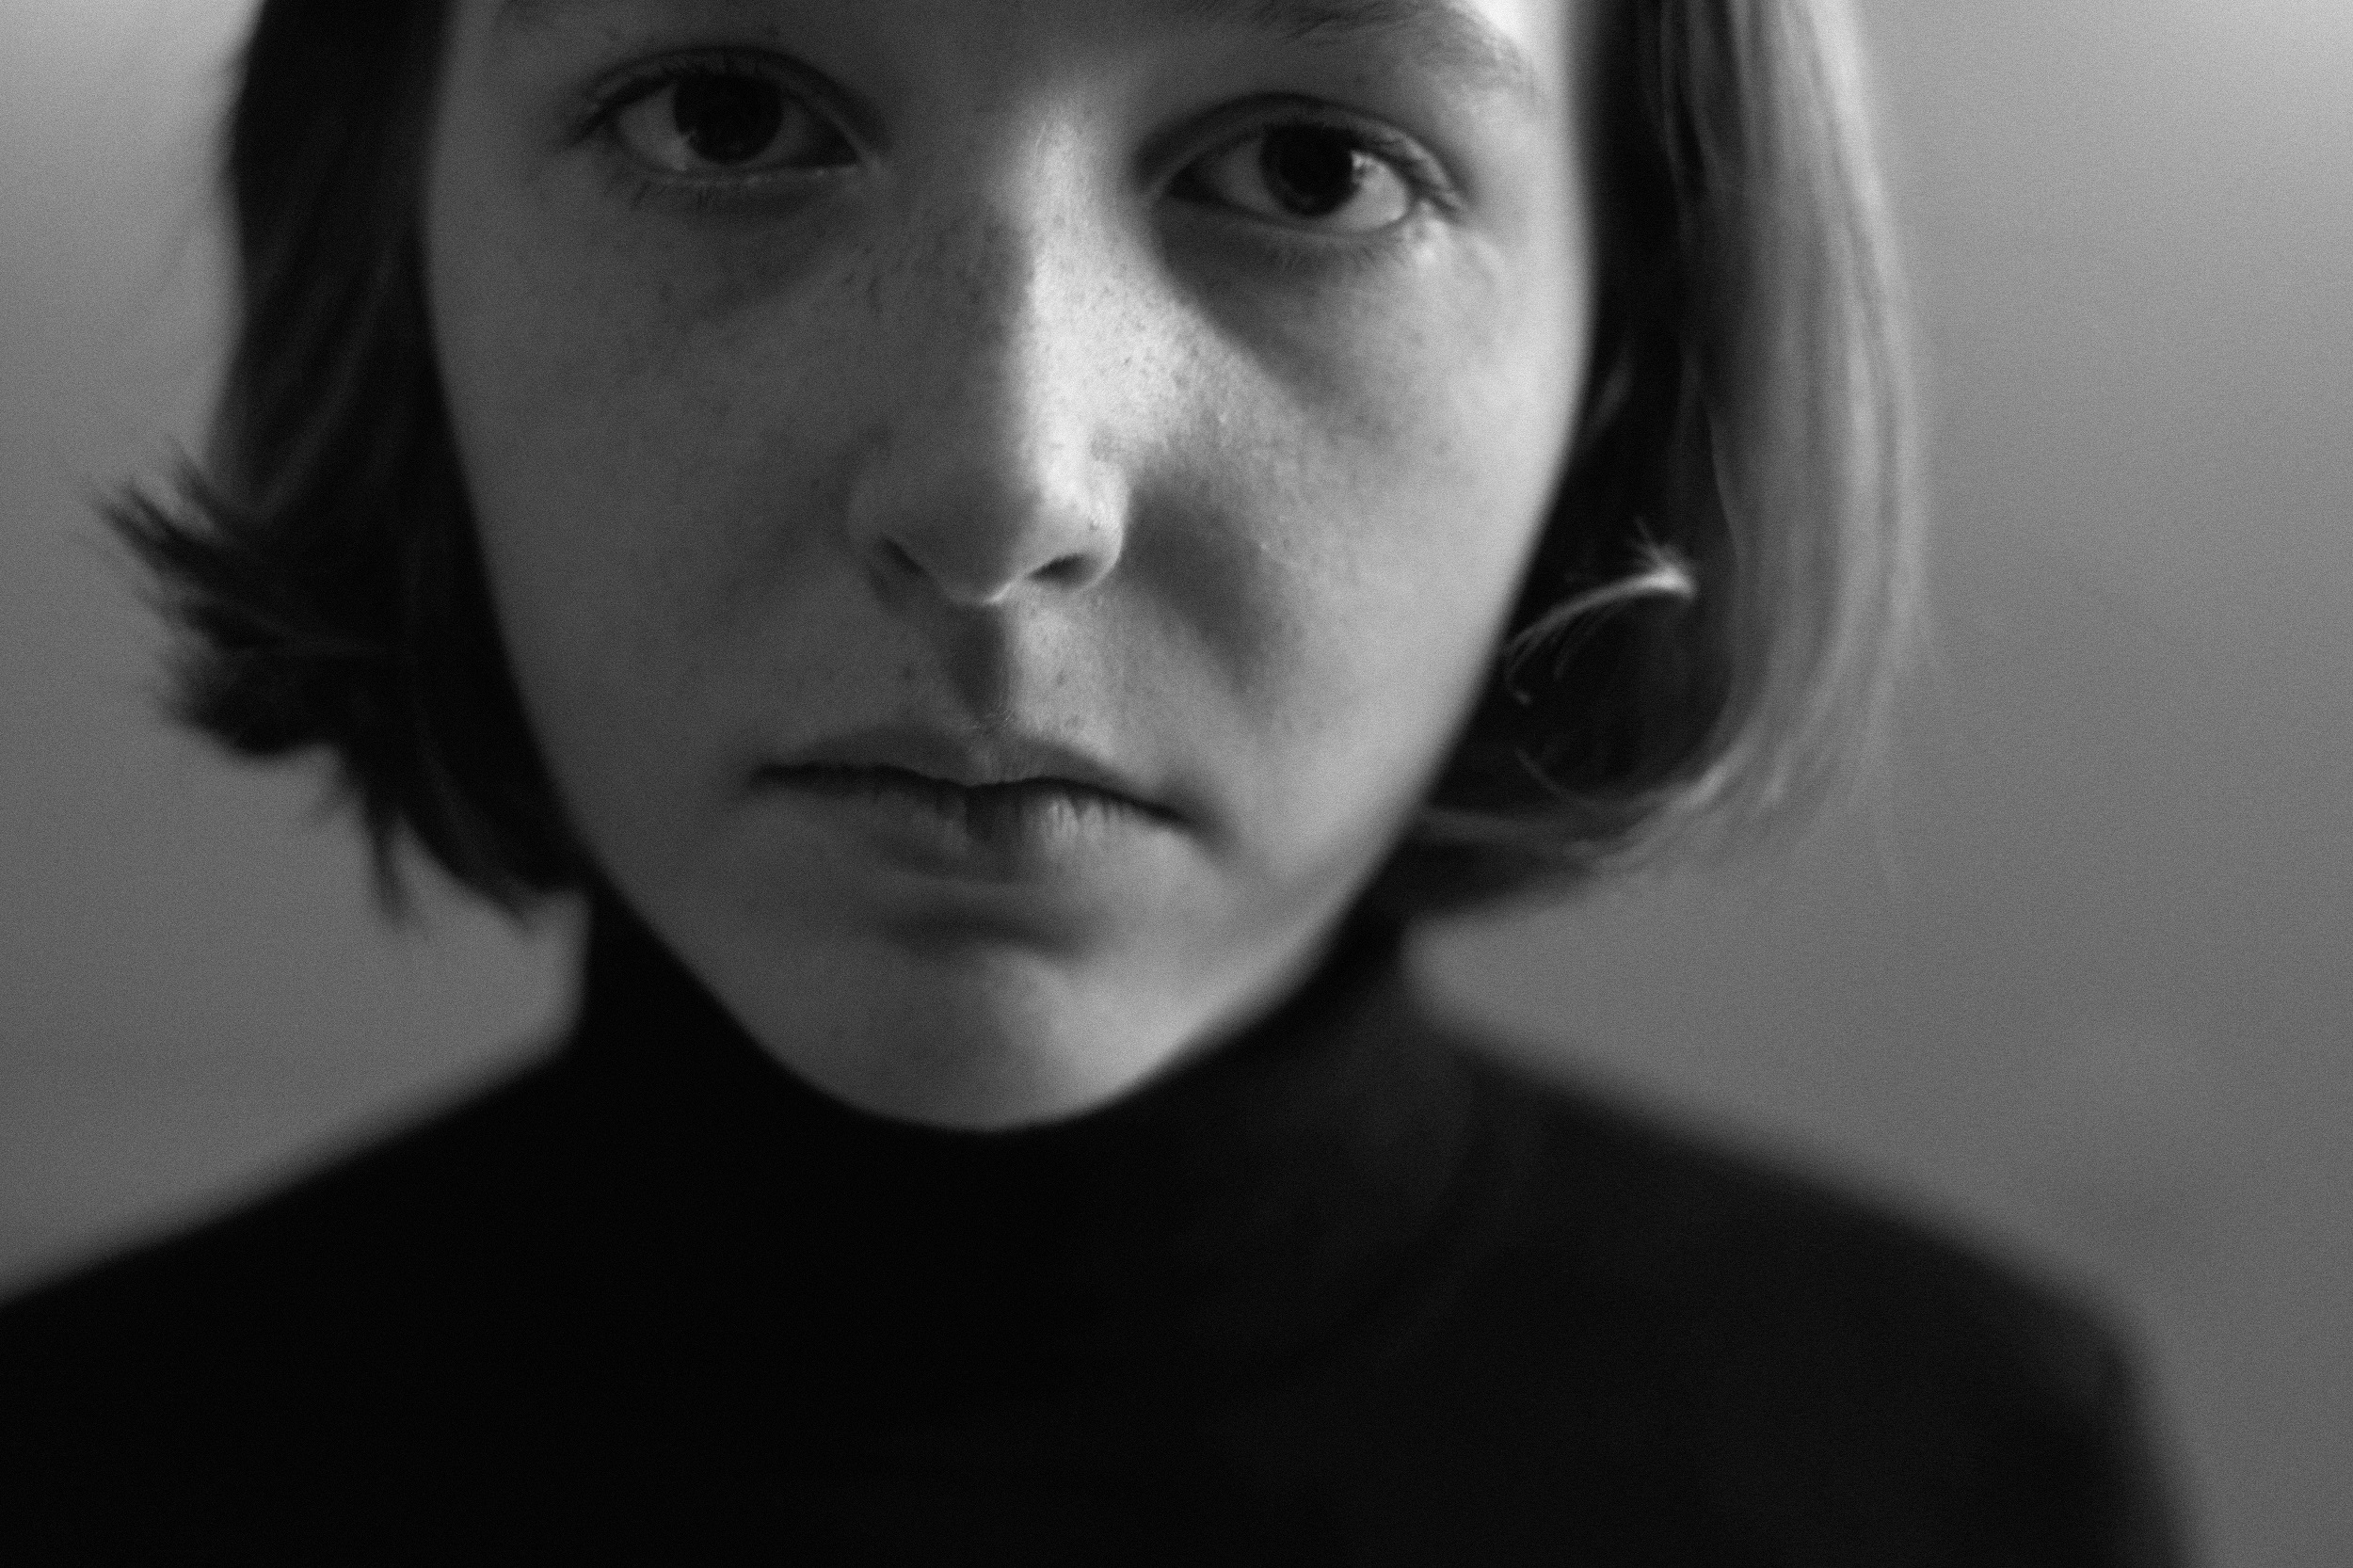 A black and white close up photo of a girl